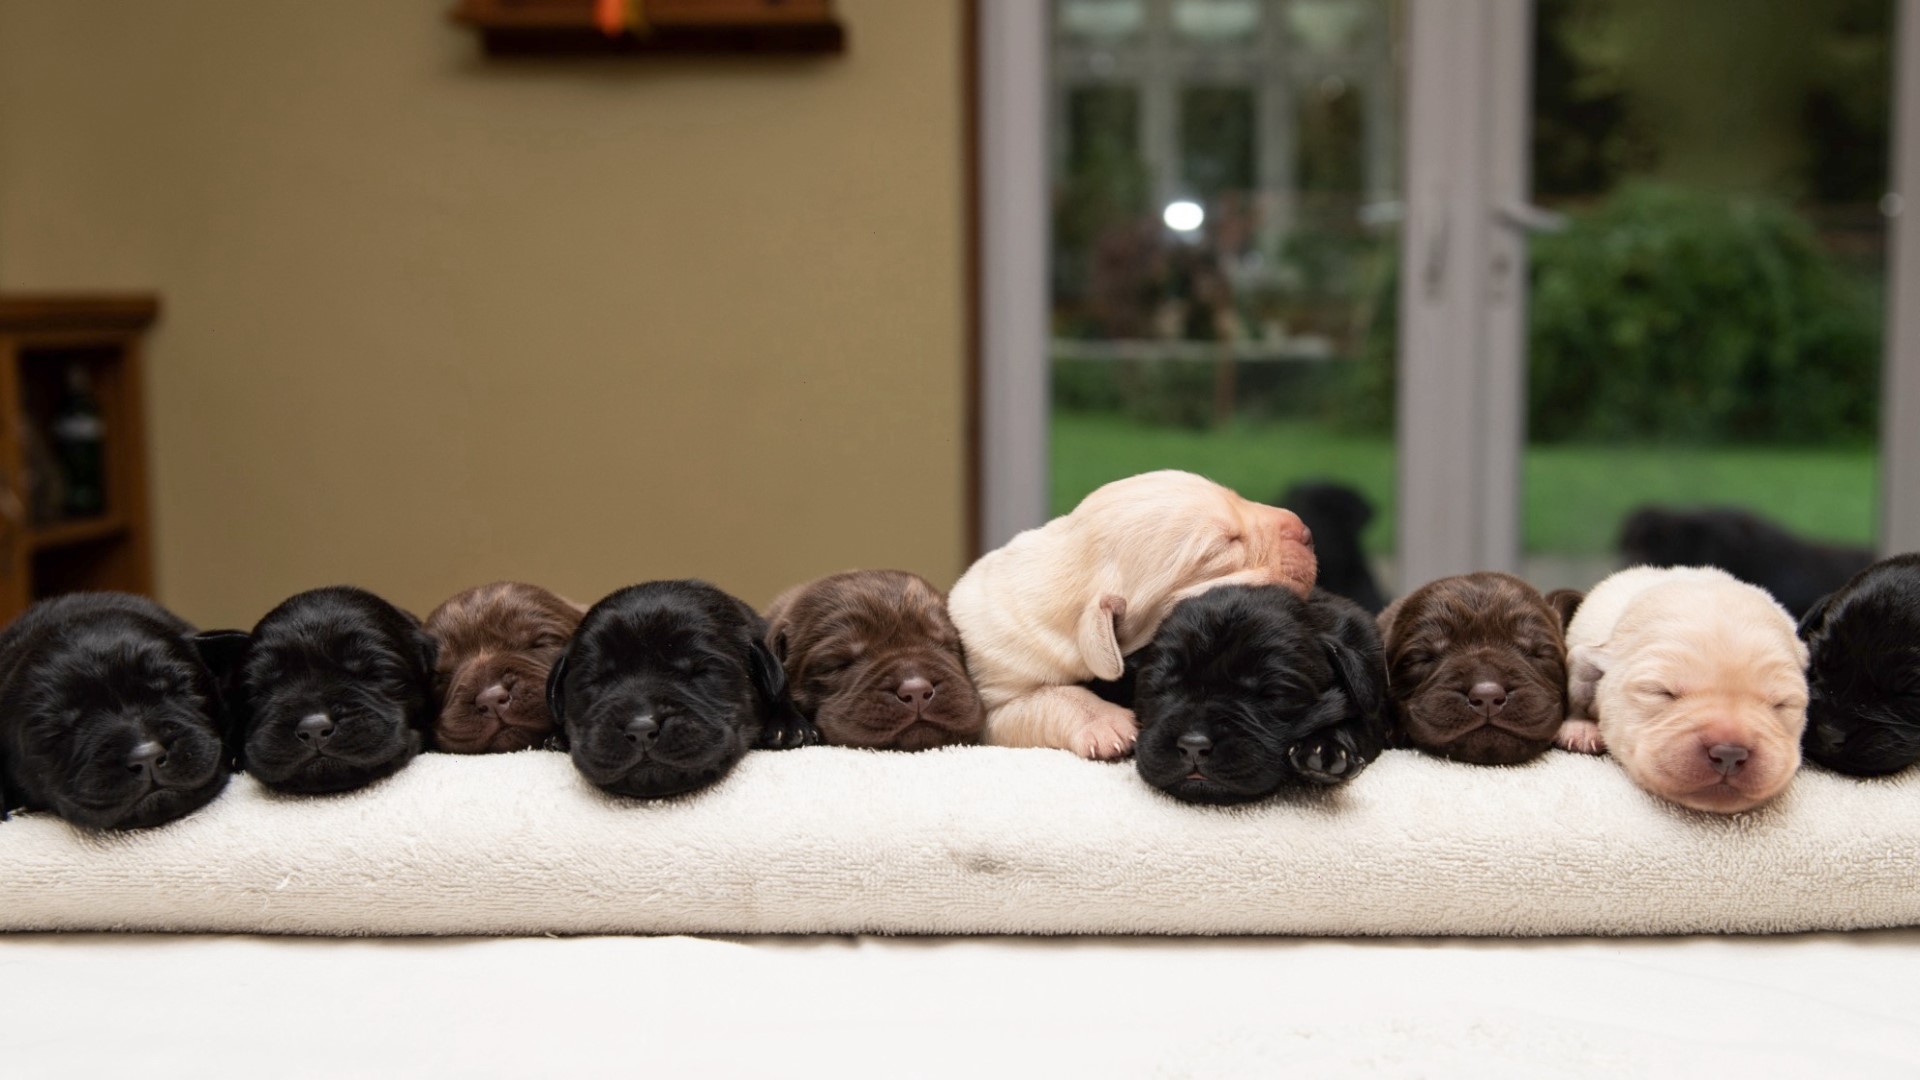 A Labrador gave birth to an extremely rare mix of pure yellow, chocolate and black puppies in the same litter. Buzz60's Johana Restrepo has more.